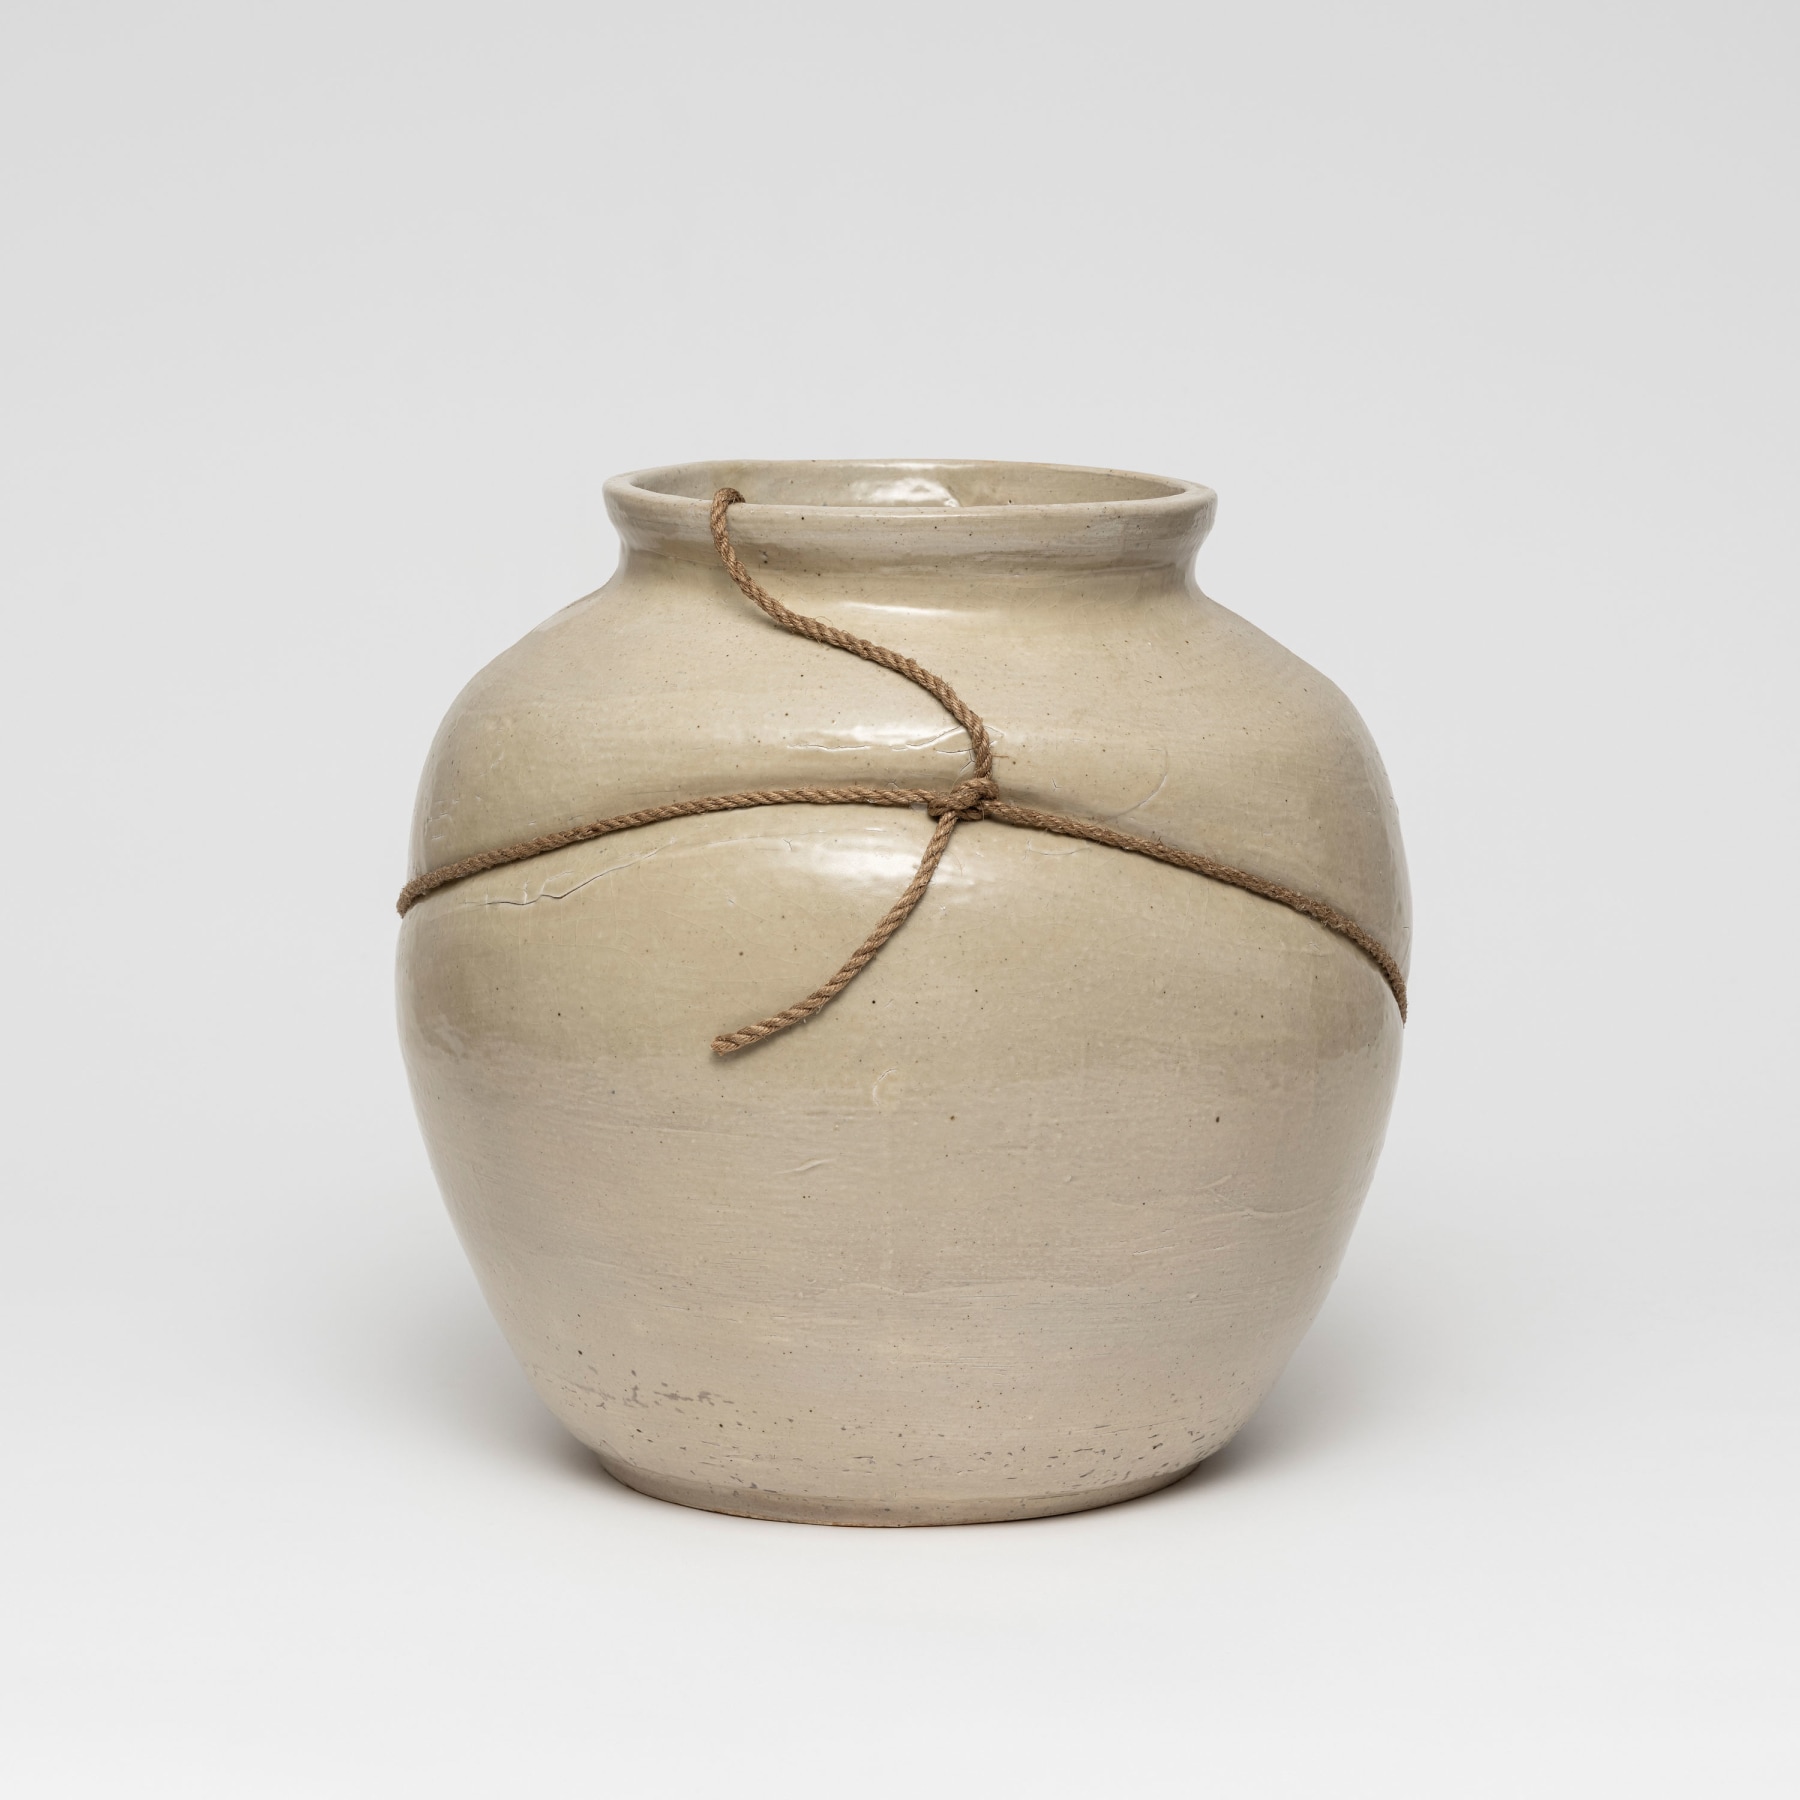 Seung-taek Lee

&amp;ldquo;Tied White Porcelain&amp;rdquo;, 1972/2015

Porcelain, rope

14 1/2 x 13 3/4 inches

37 x 35 cm
LEE 41